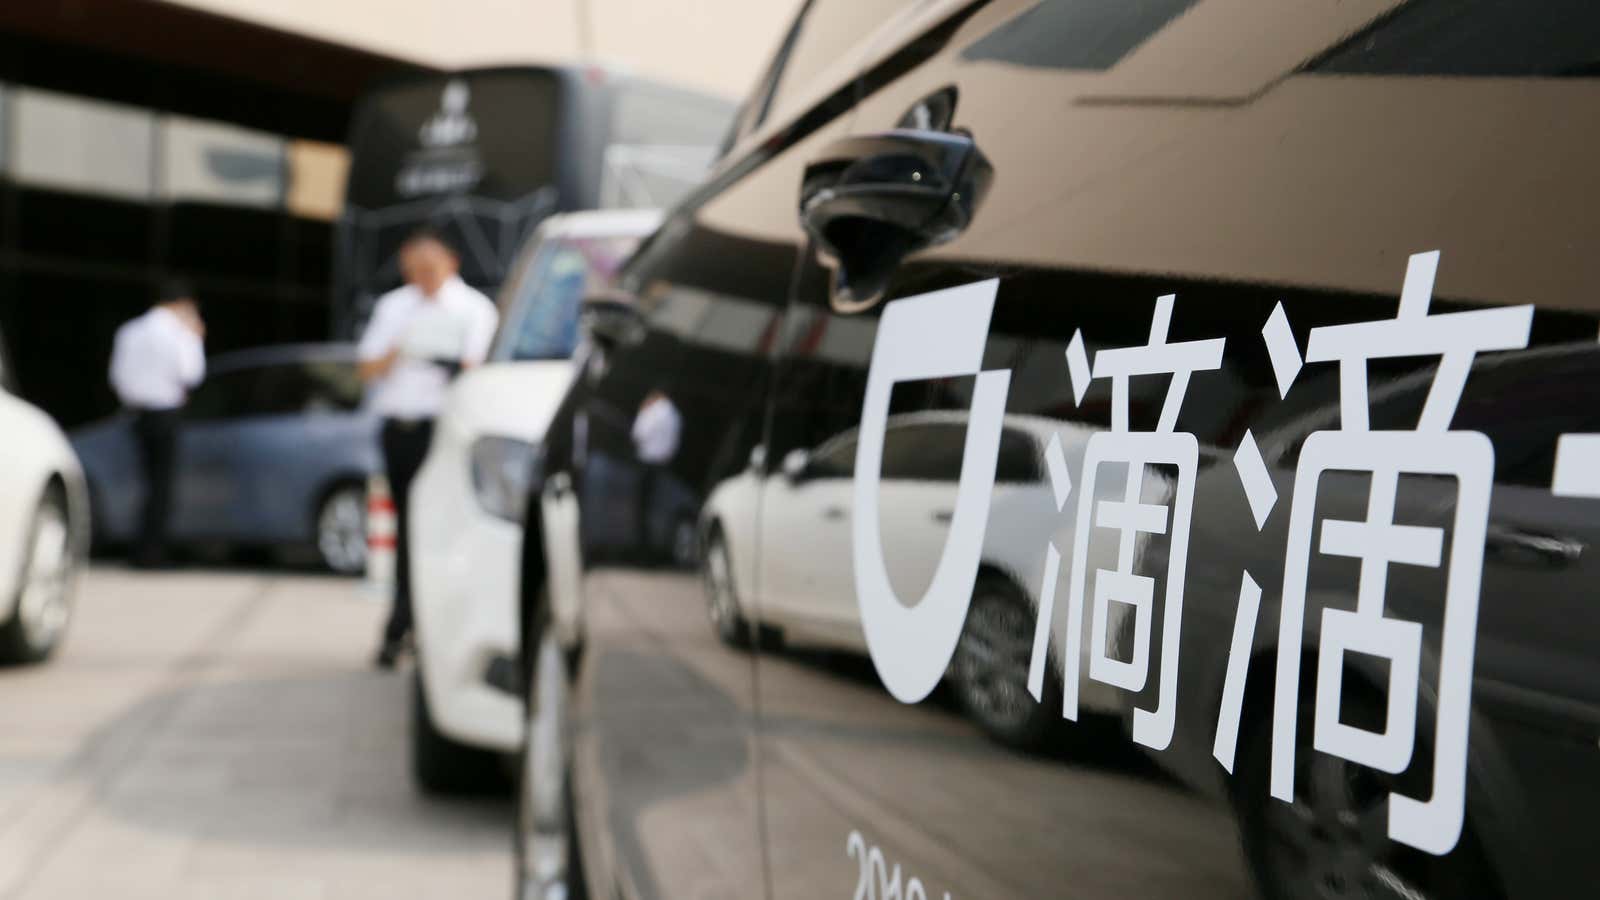 Didi’s saga has led to free rides for users.